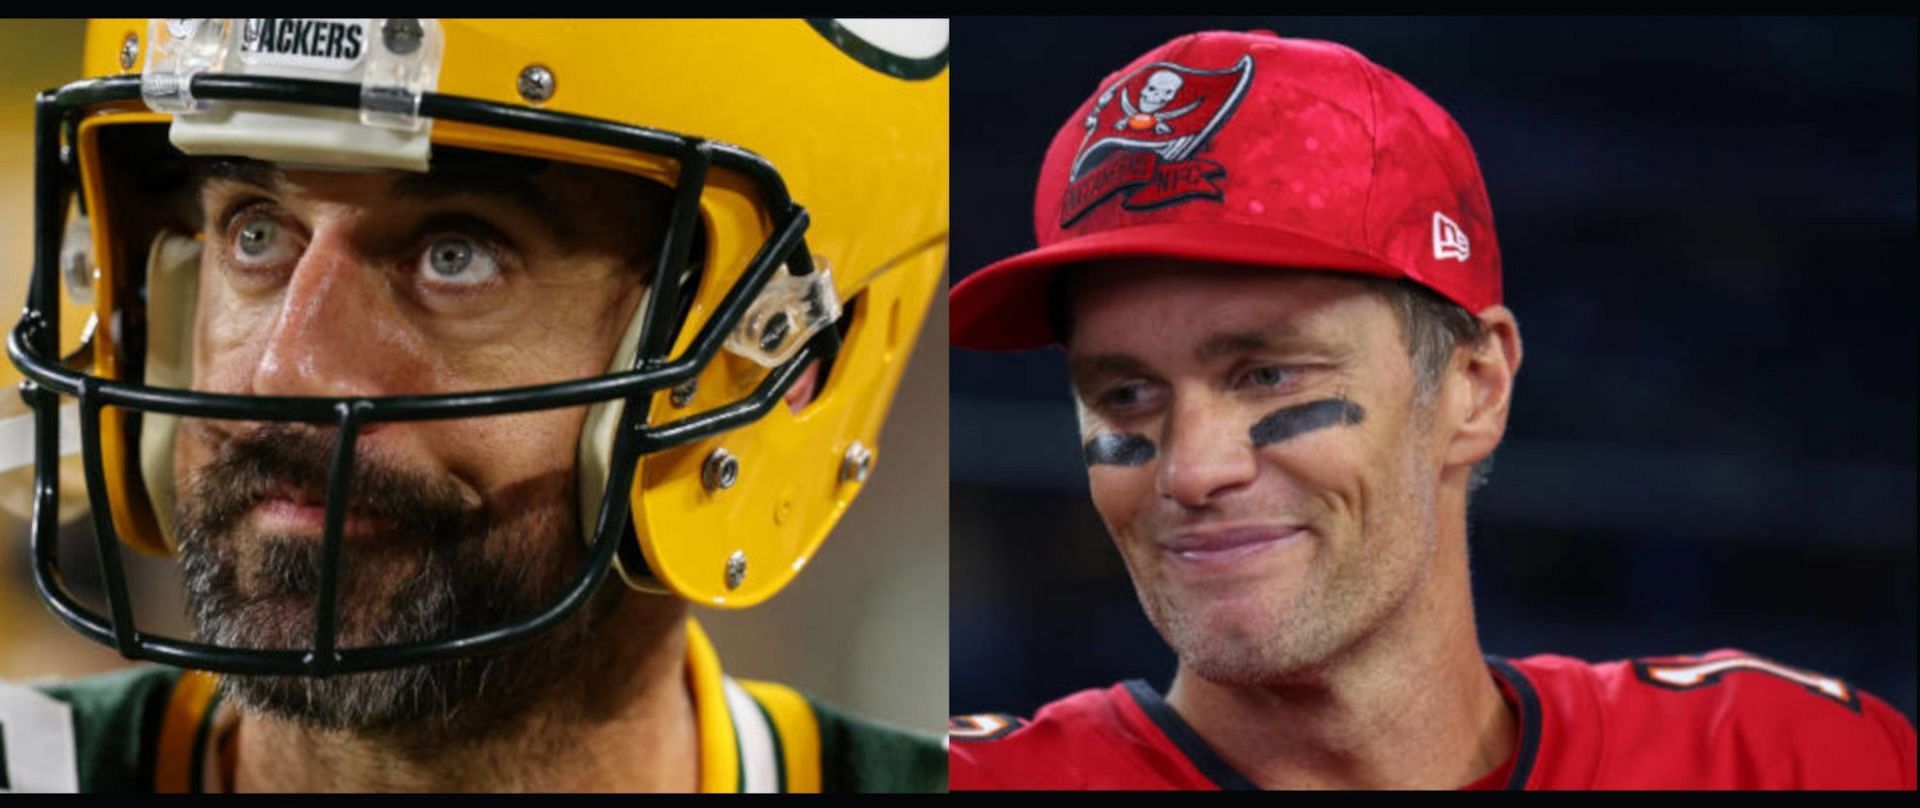 Brady will look to go 5-1 against Rodgers on Sunday